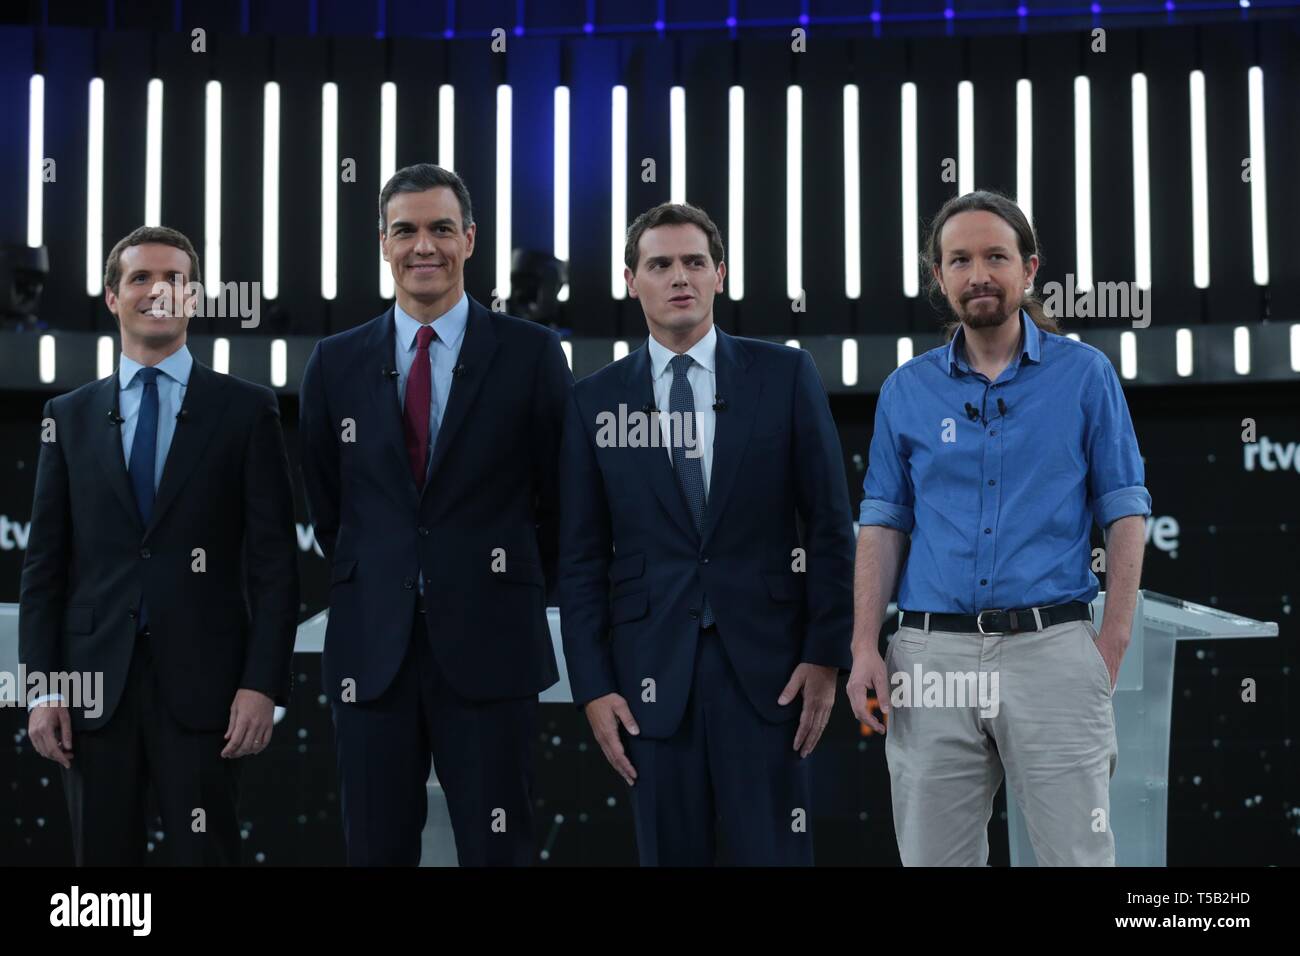 Madrid, Spain; 22/04/2019. Electoral debate of the four main candidates for the presidency of Spain next 28 abril ((28A).  Pablo Casado (PP), Pedro Sánchez (Psoe), Albert Rivera (CDs) and Pablo Iglesias (Podemos)   Photo: Juan Carlos Rojas/Picture Alliance | usage worldwide Stock Photo